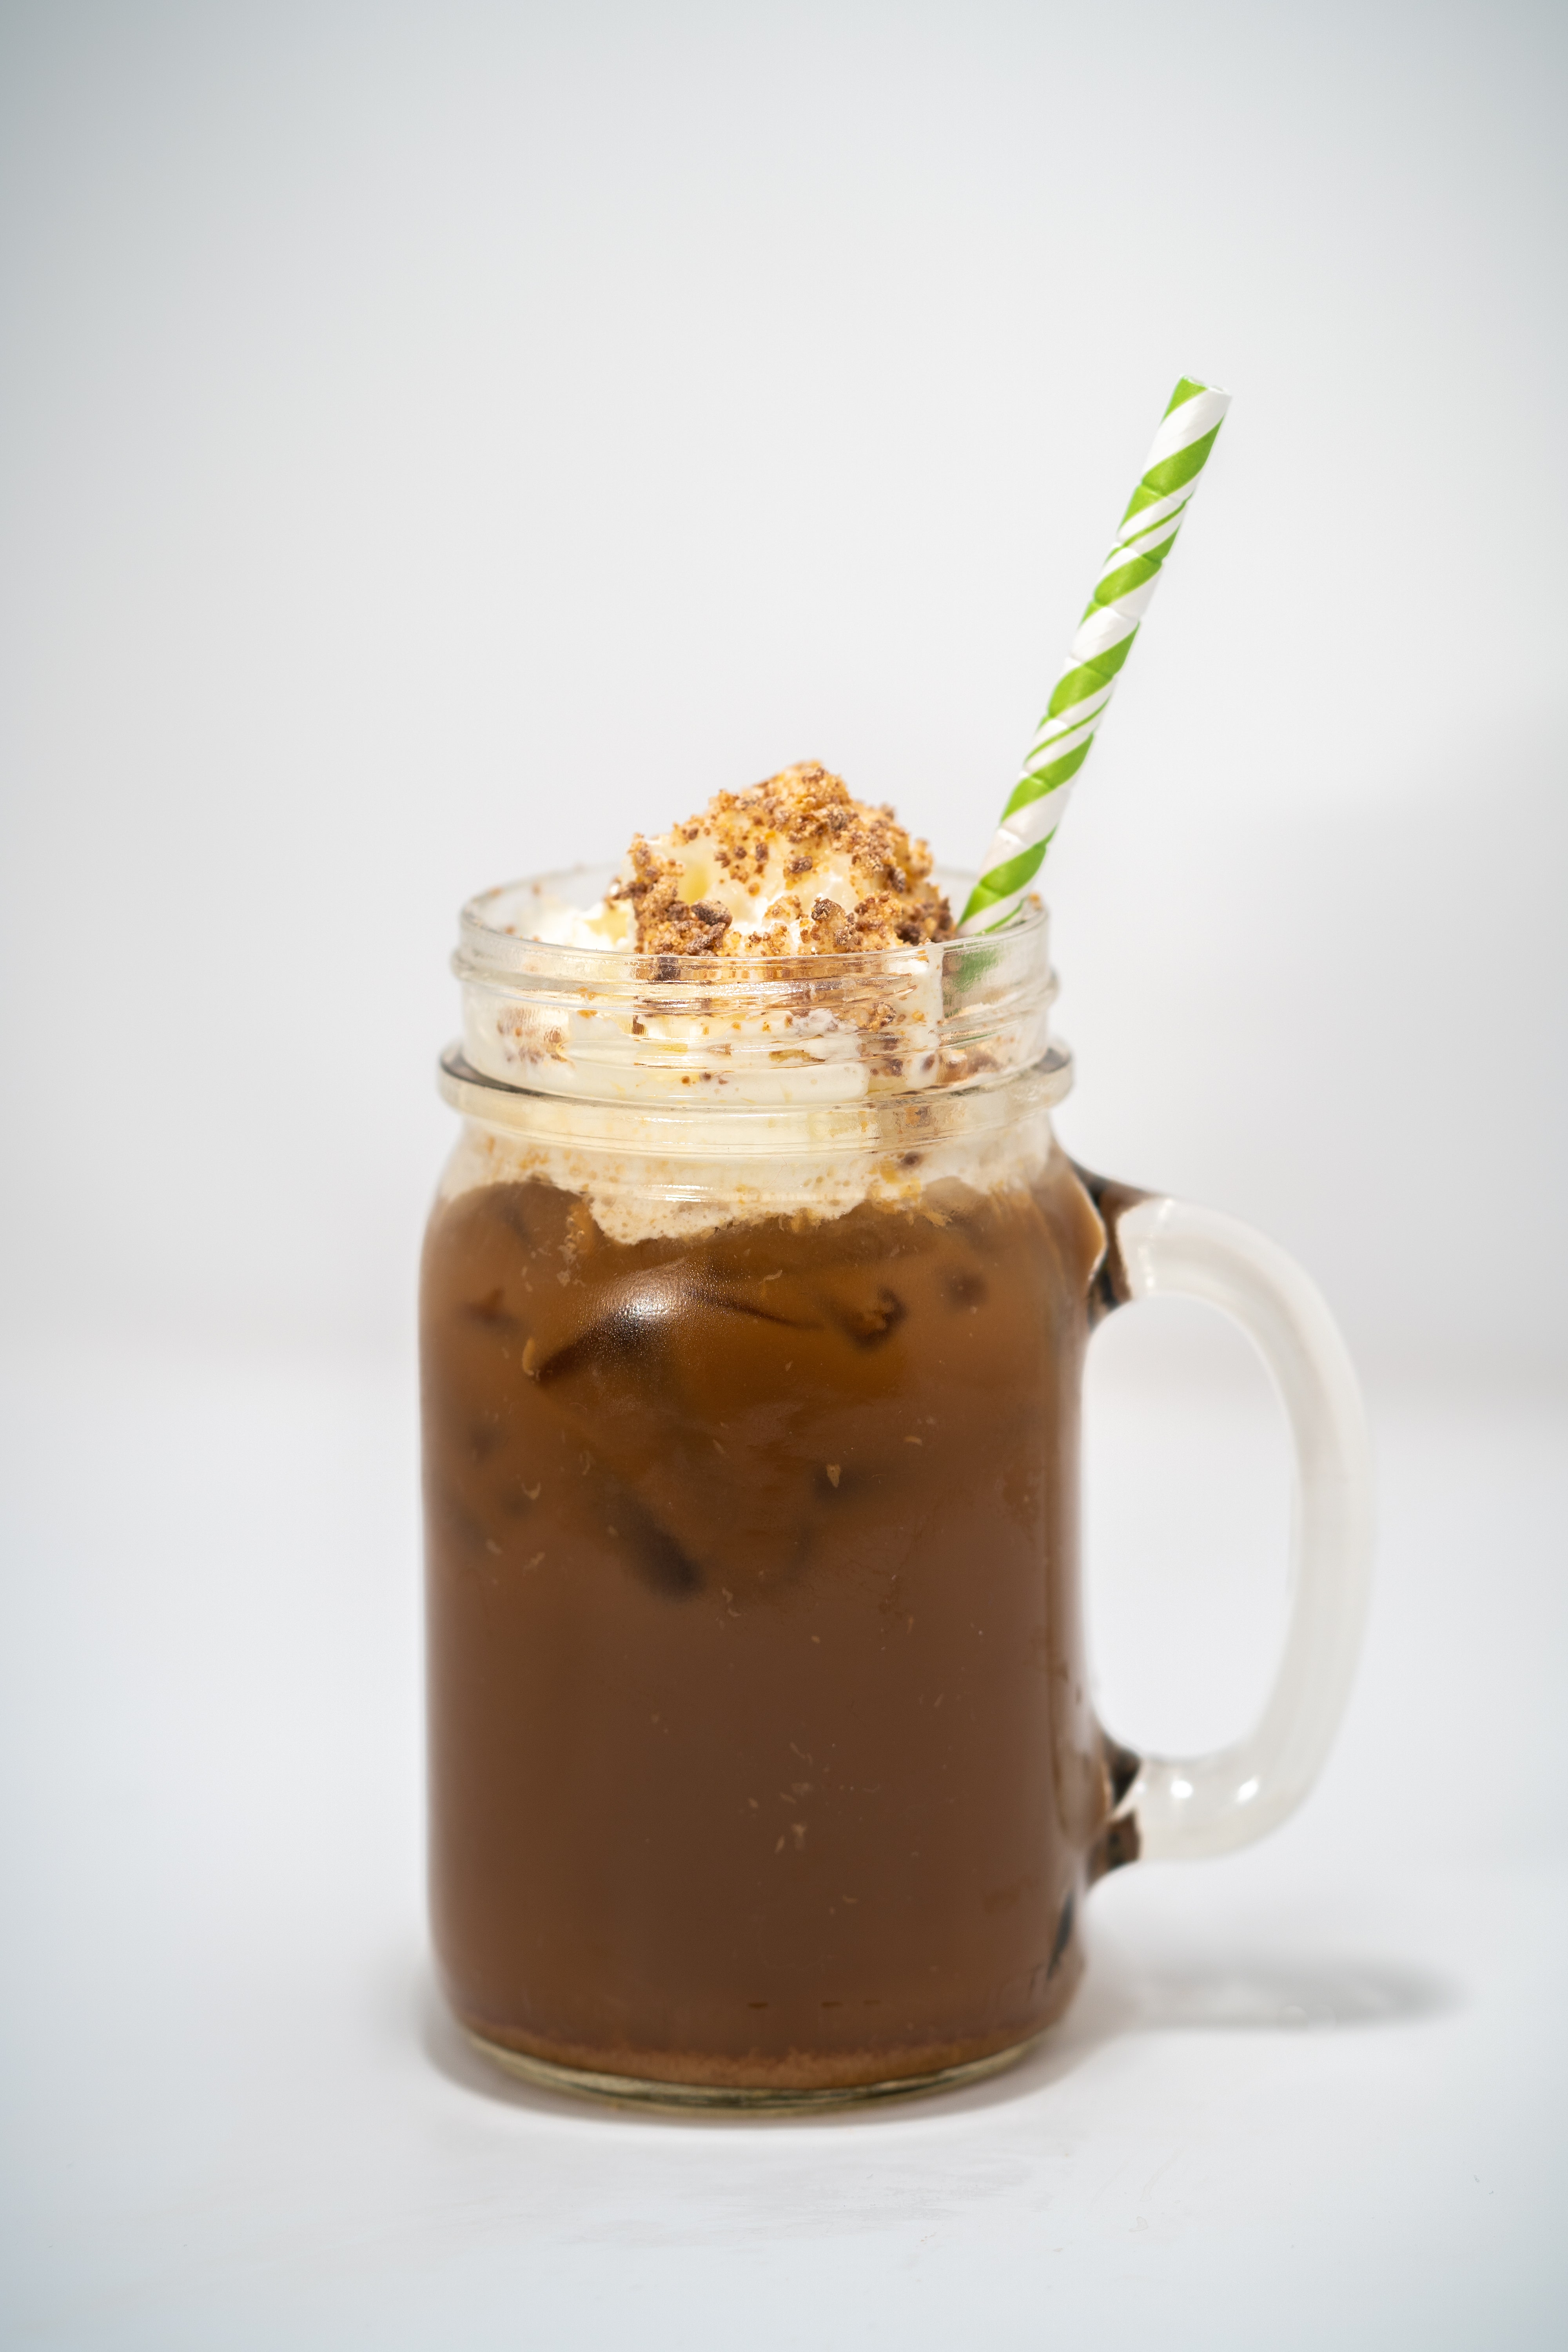 Iced REESE'S Peanut Butter Coffee Video + Ingredients Step-by-step walk through